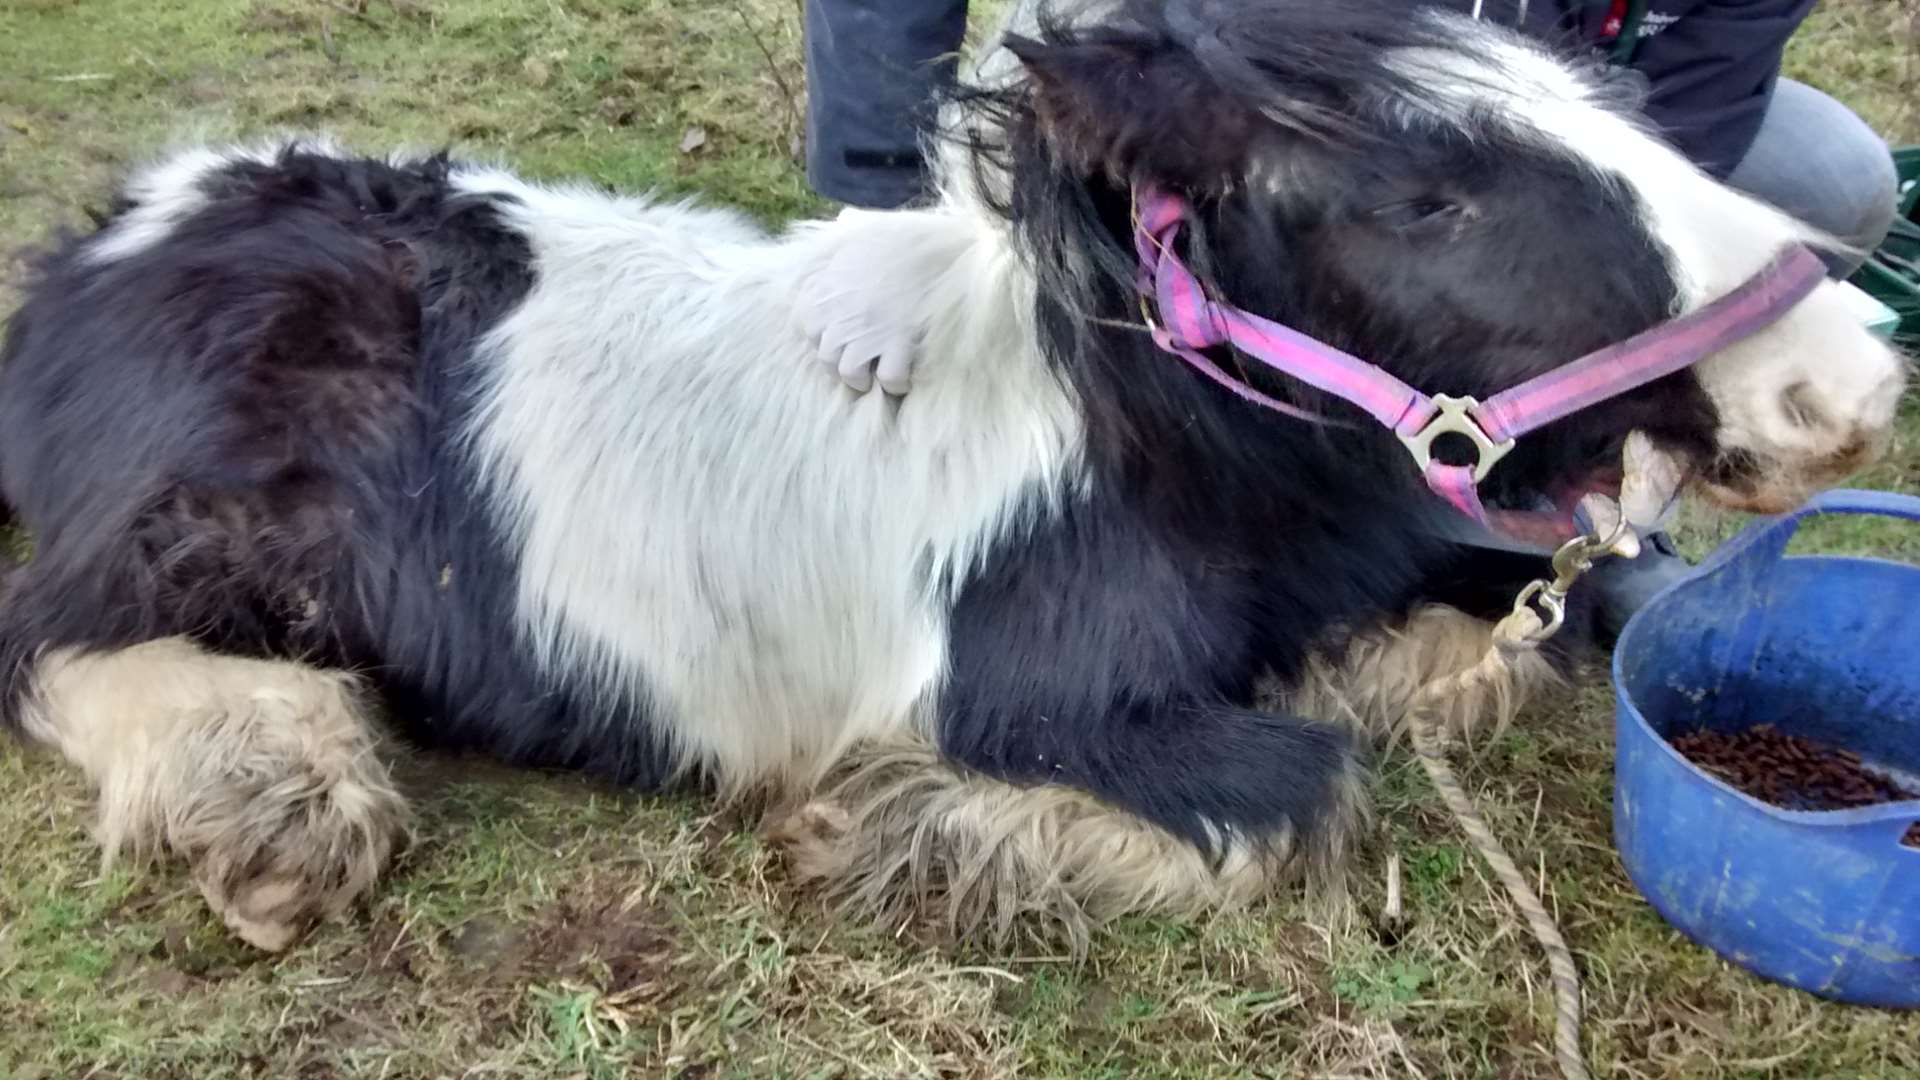 A young piebald pony found collapsed and dying in Yalding, Maidstone. She could not be saved.